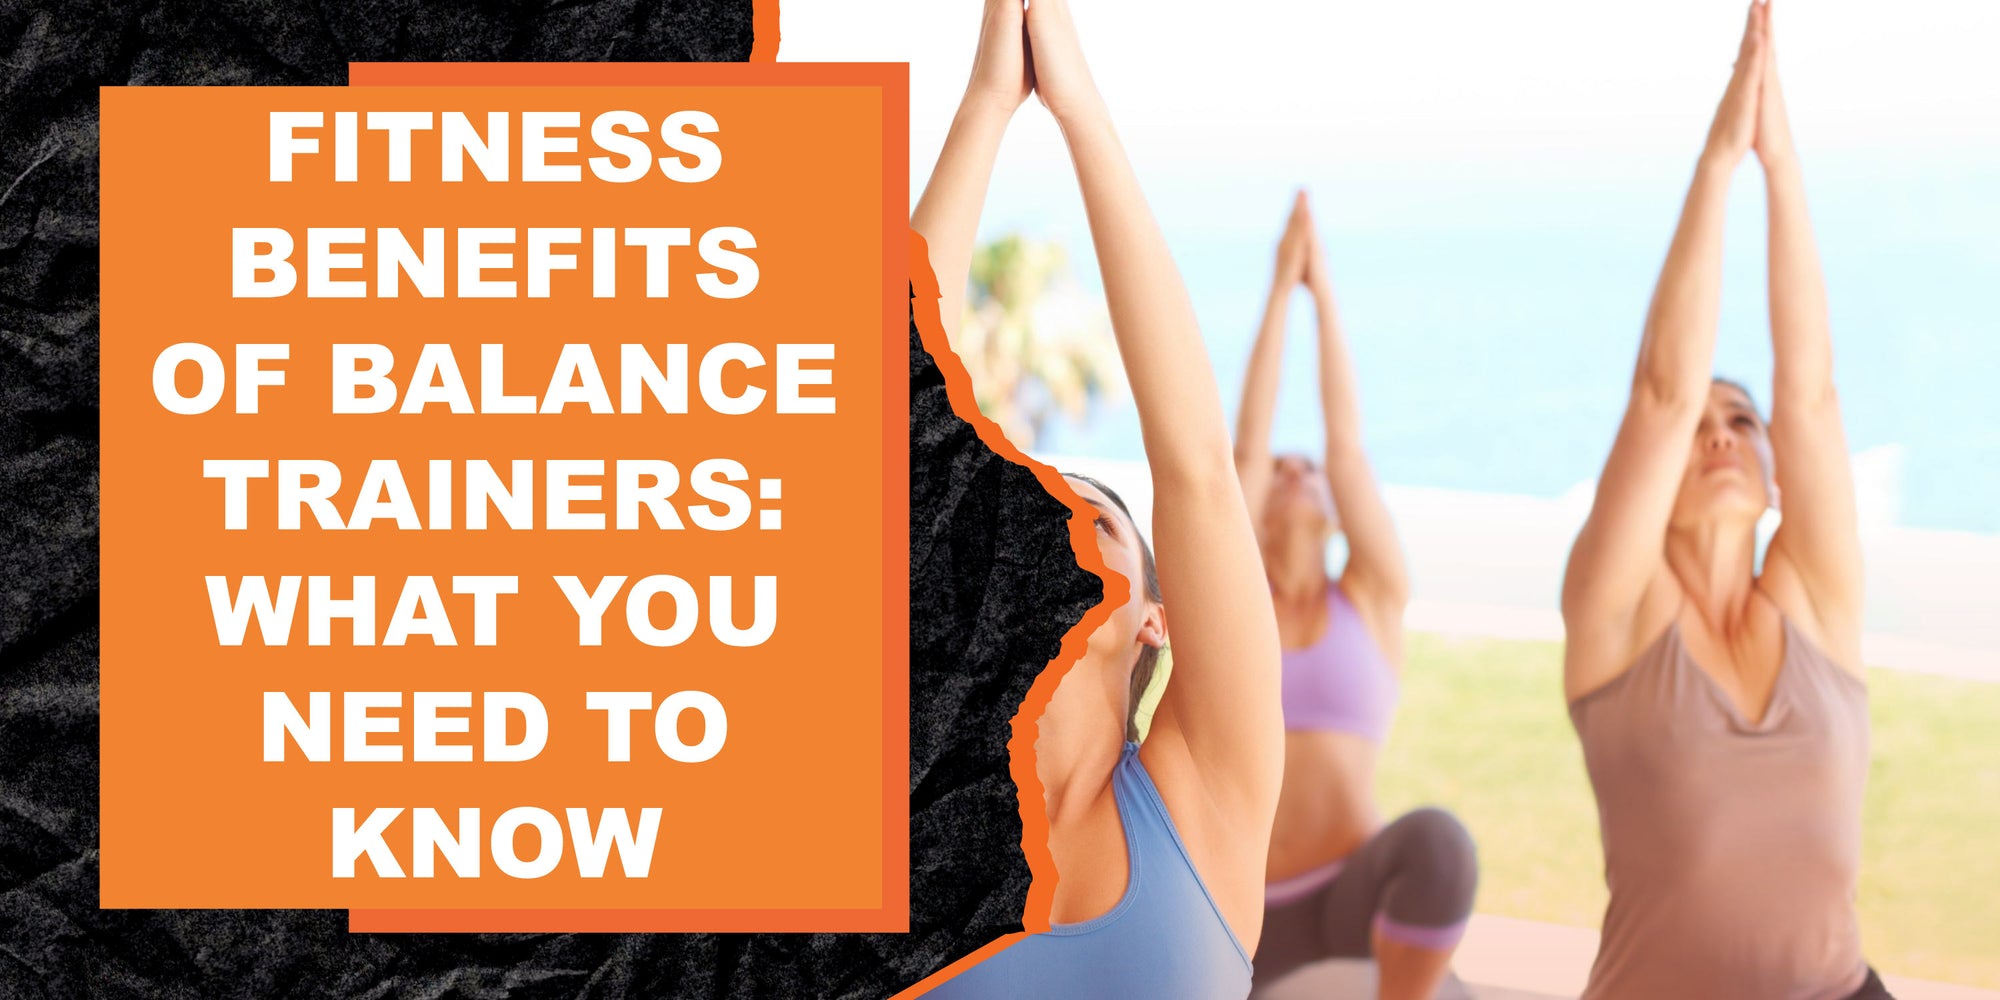 Fitness Benefits of Balance Trainers: What You Need to Know